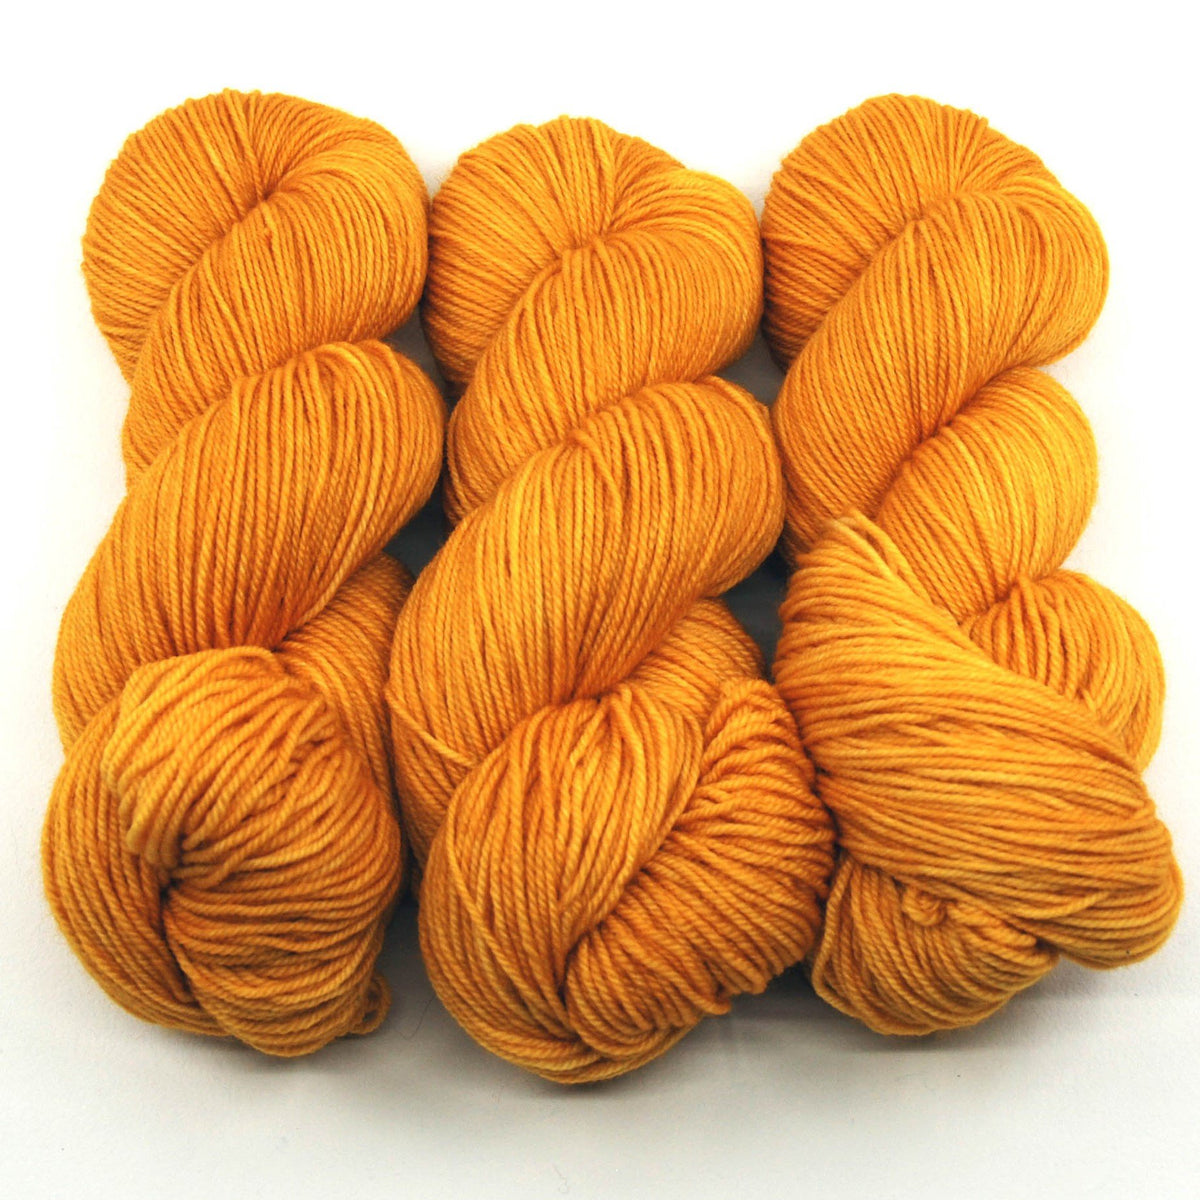 Marigold - Passion 8 Fingering - Dyed Stock